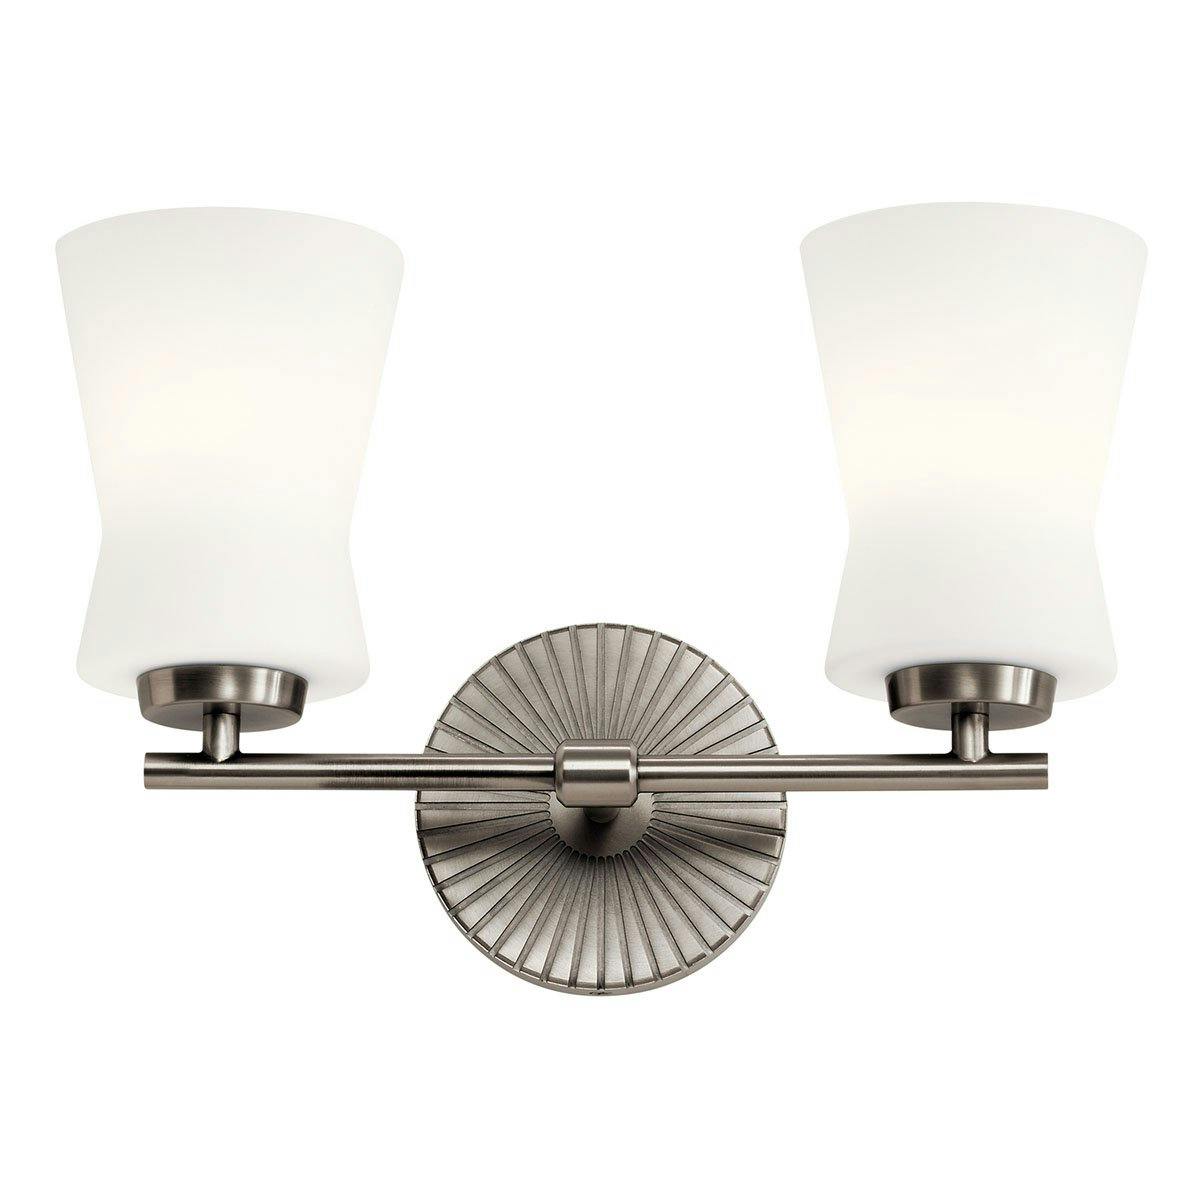 Front view of the Brianne 2 Light Vanity Light Pewter on a white background